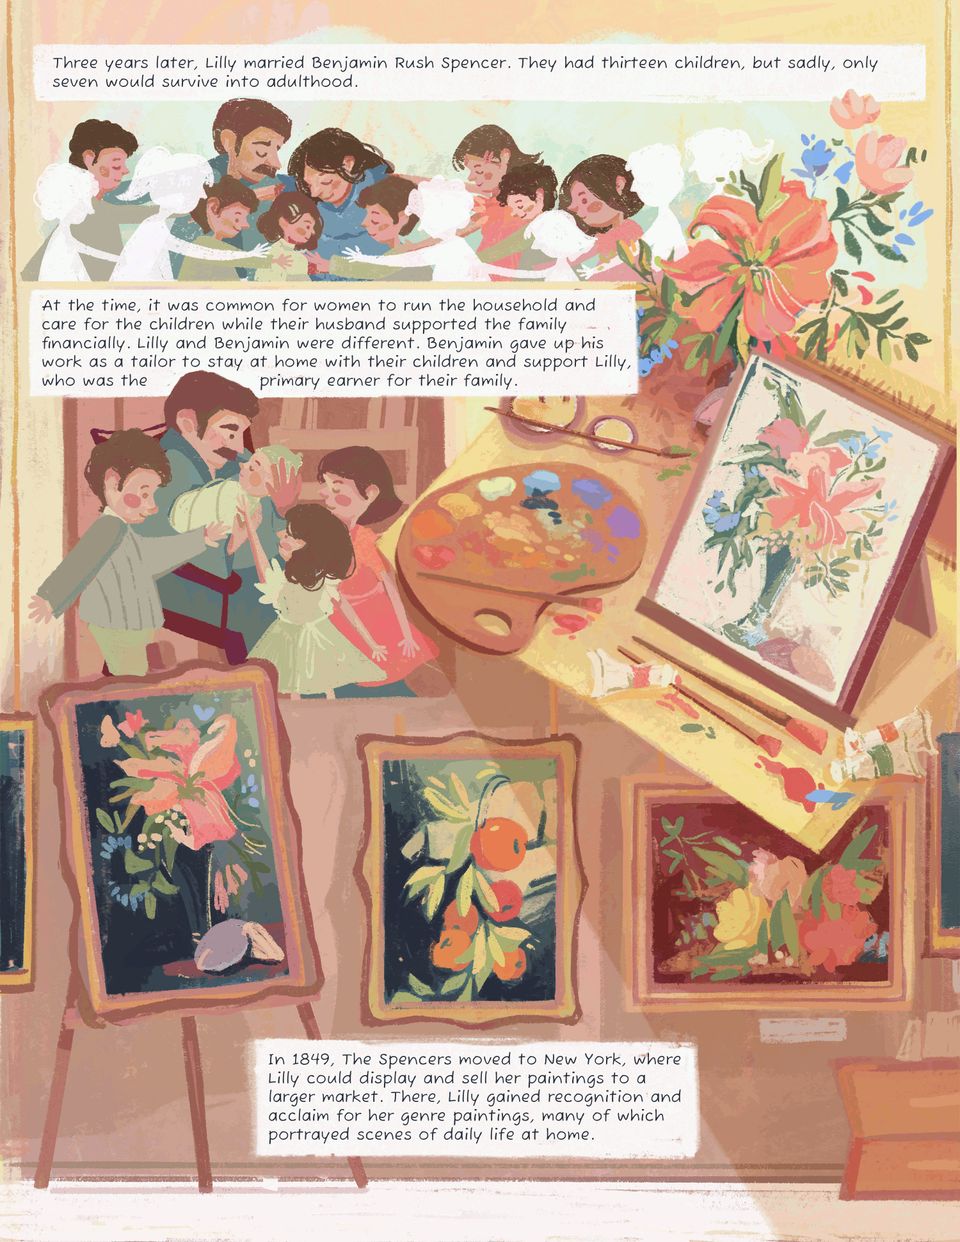  Illustrations and text descriptions of Lilly and her family, showing her husband raising the children surrounded by Lilly's still life genre paintings.